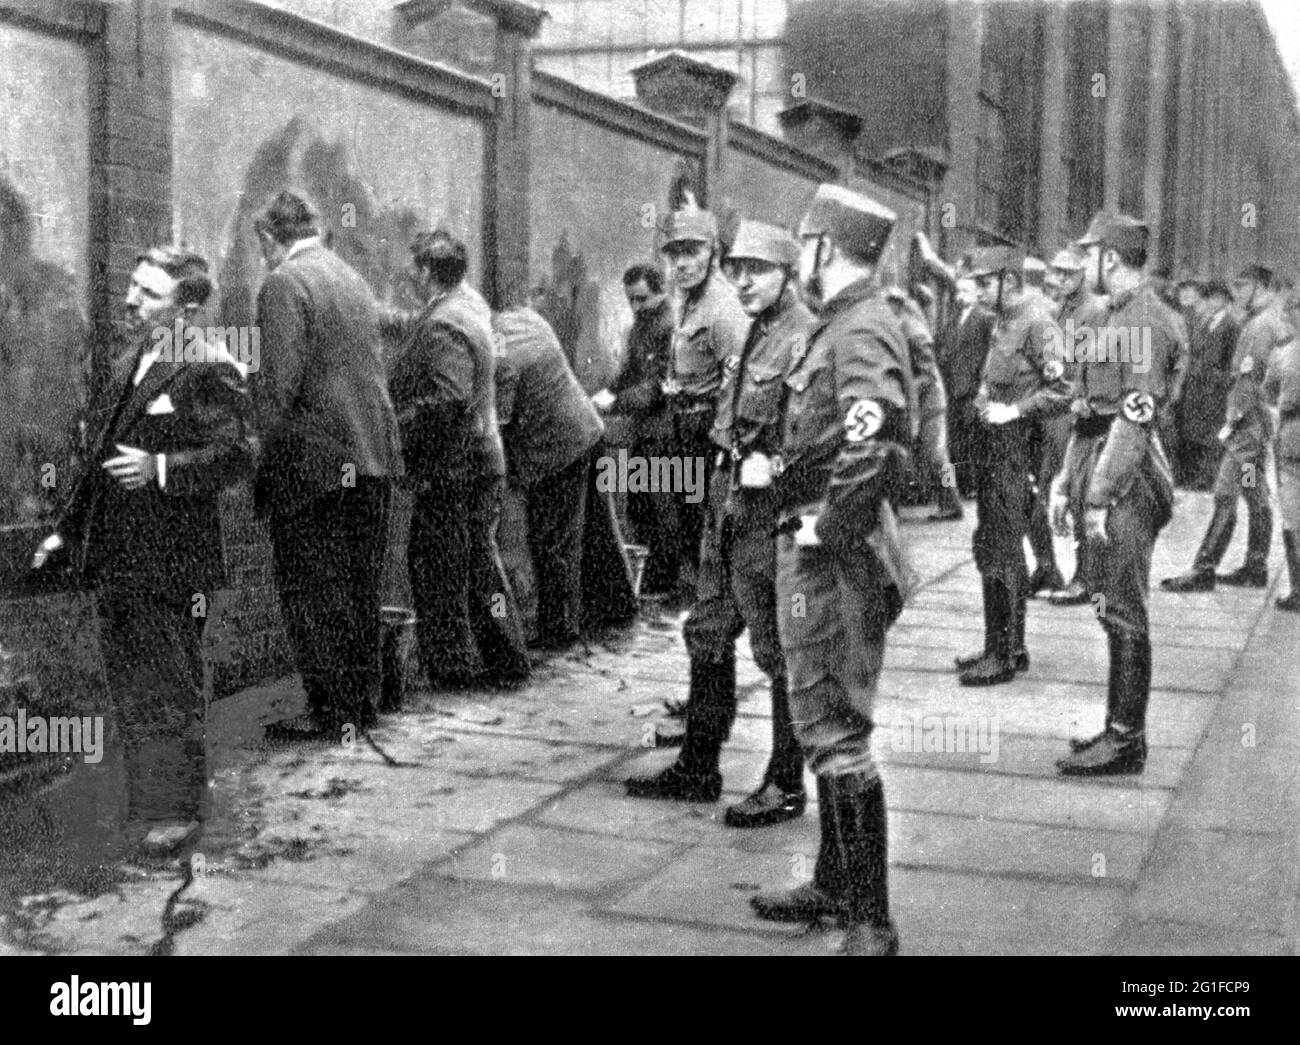 National Socialism, serious crime, arrest of communists and socialists after the 27.2.1933 by members of the storm battalion (SA), EDITORIAL-USE-ONLY Stock Photo